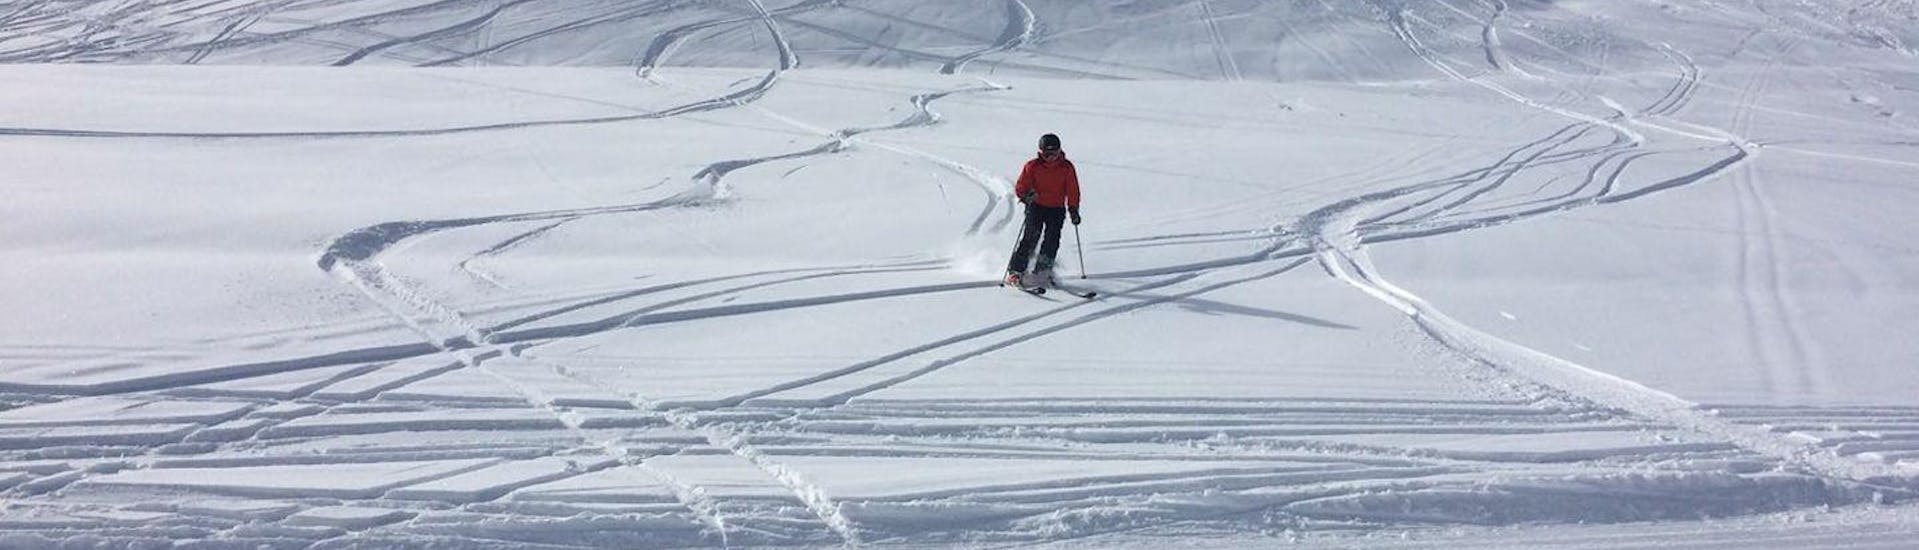 A ski instructor enjoys skiing in deep snow with the Private Ski Touring Guide for All Levels from the Ski School Ingrid Salvenmoser.